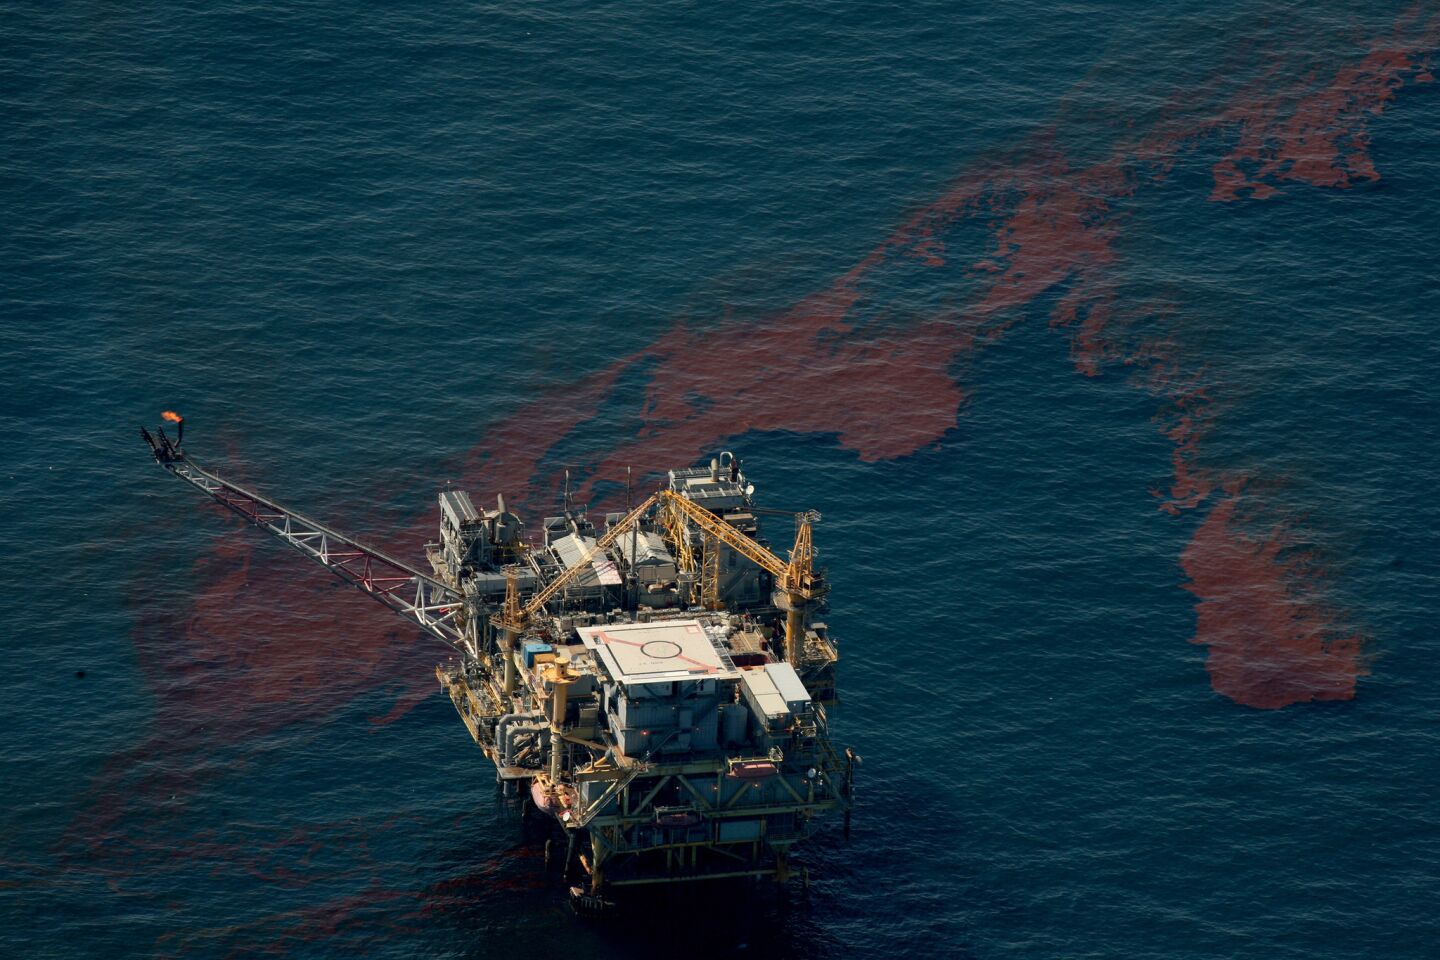 The oil spill in the Gulf of Mexico continued to spread despite BP's efforts to cap the well. In May 2010, streams of oil float by another oil production platform as the oil heads toward the Louisiana coastline.